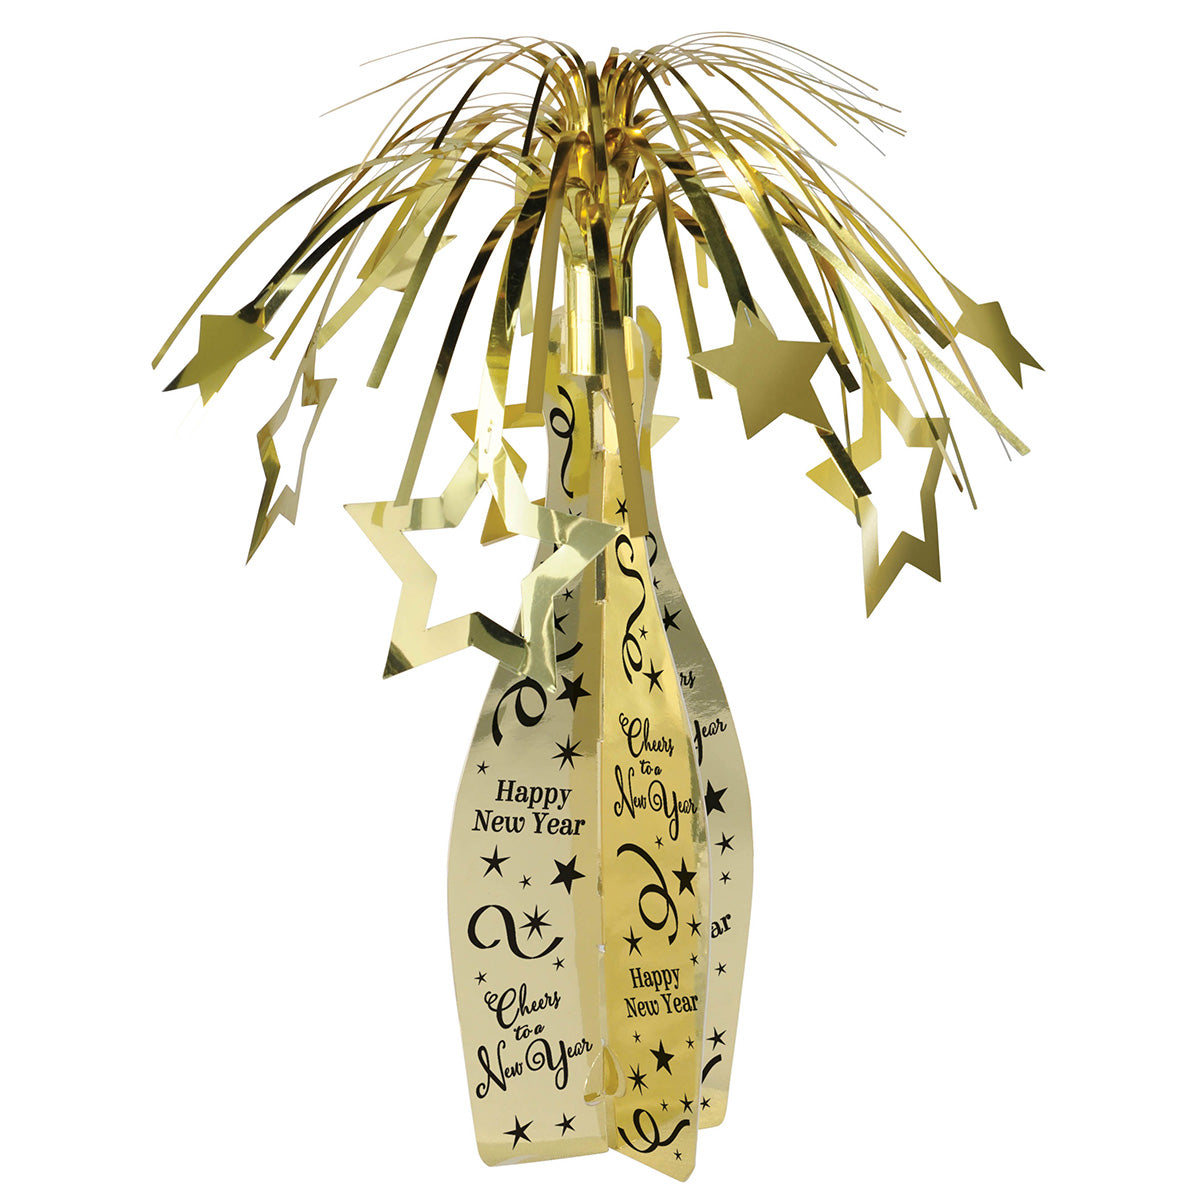 AMSCAN CA New Year Gold Champagne Bottle Centerpiece, 19 Inches, 1 Count